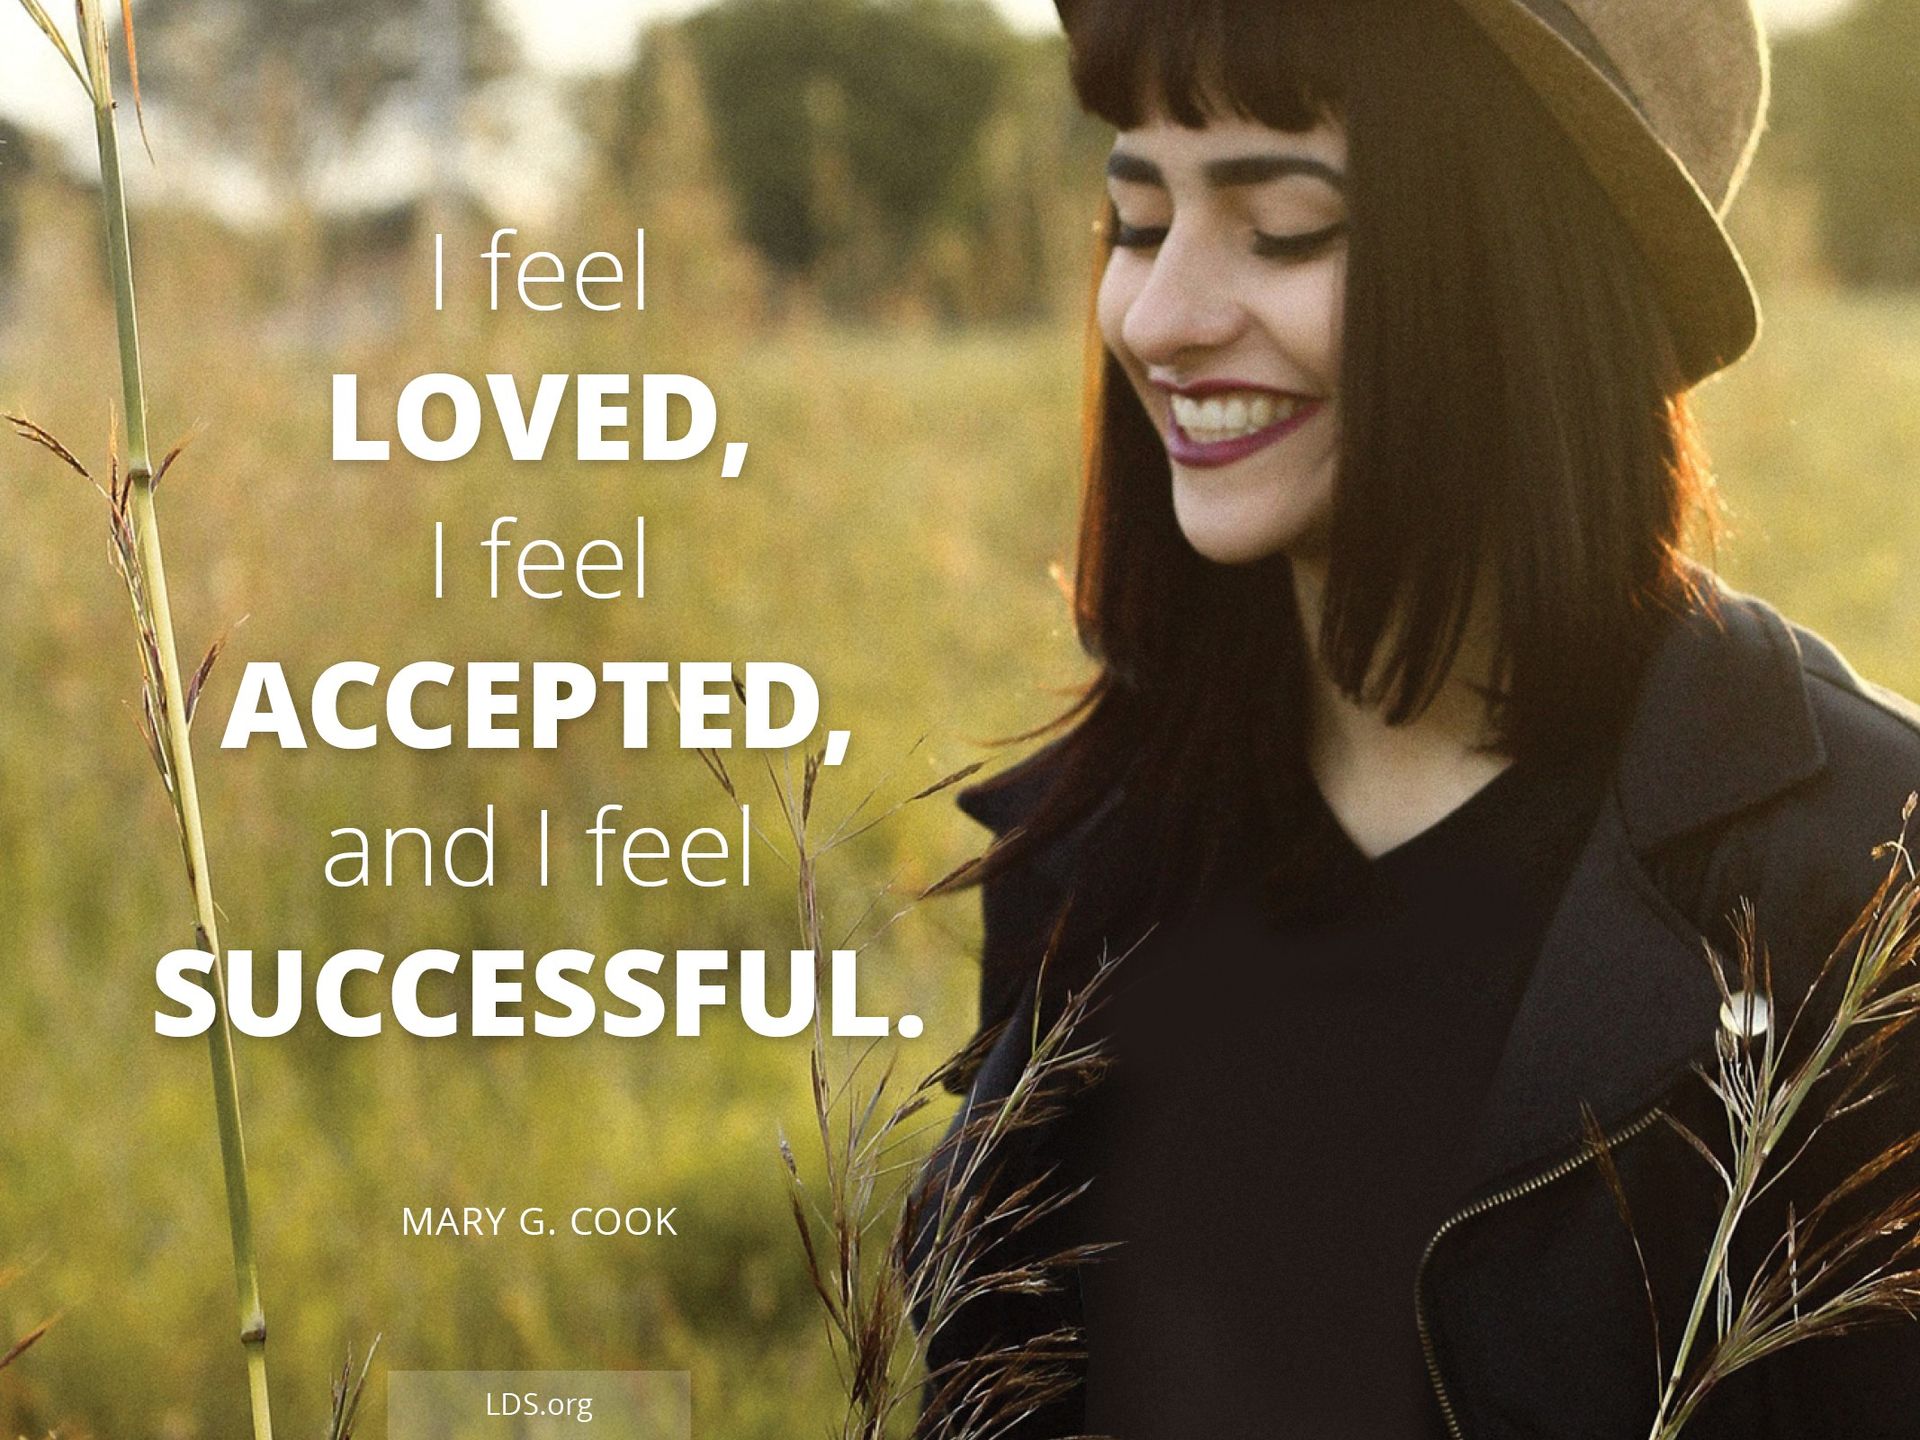 “I feel loved, I feel accepted, and I feel successful.”—Mary G. Cook, “Find Joy in Everyday Life”